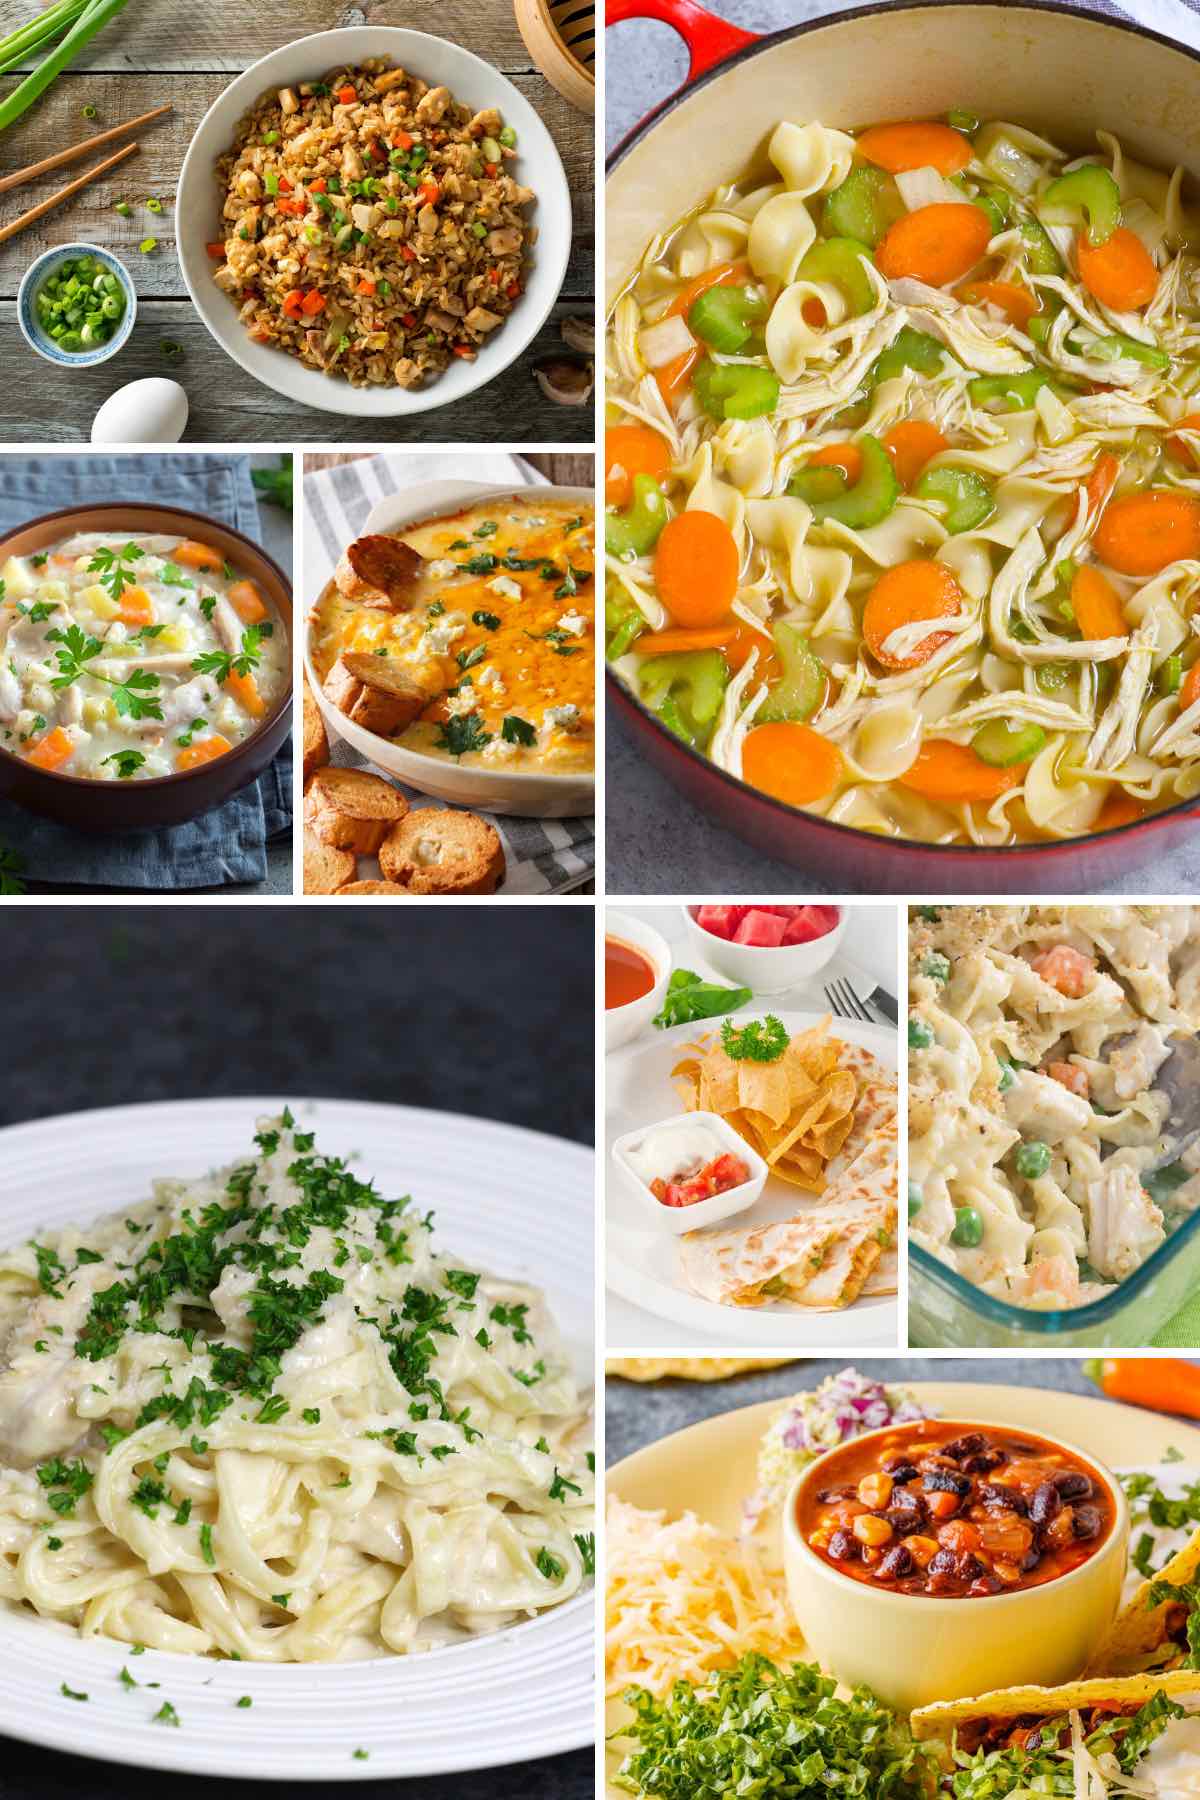 Canned chicken recipes such as noodle soup, fried rice, taco soup, quesadillas, and casserole.